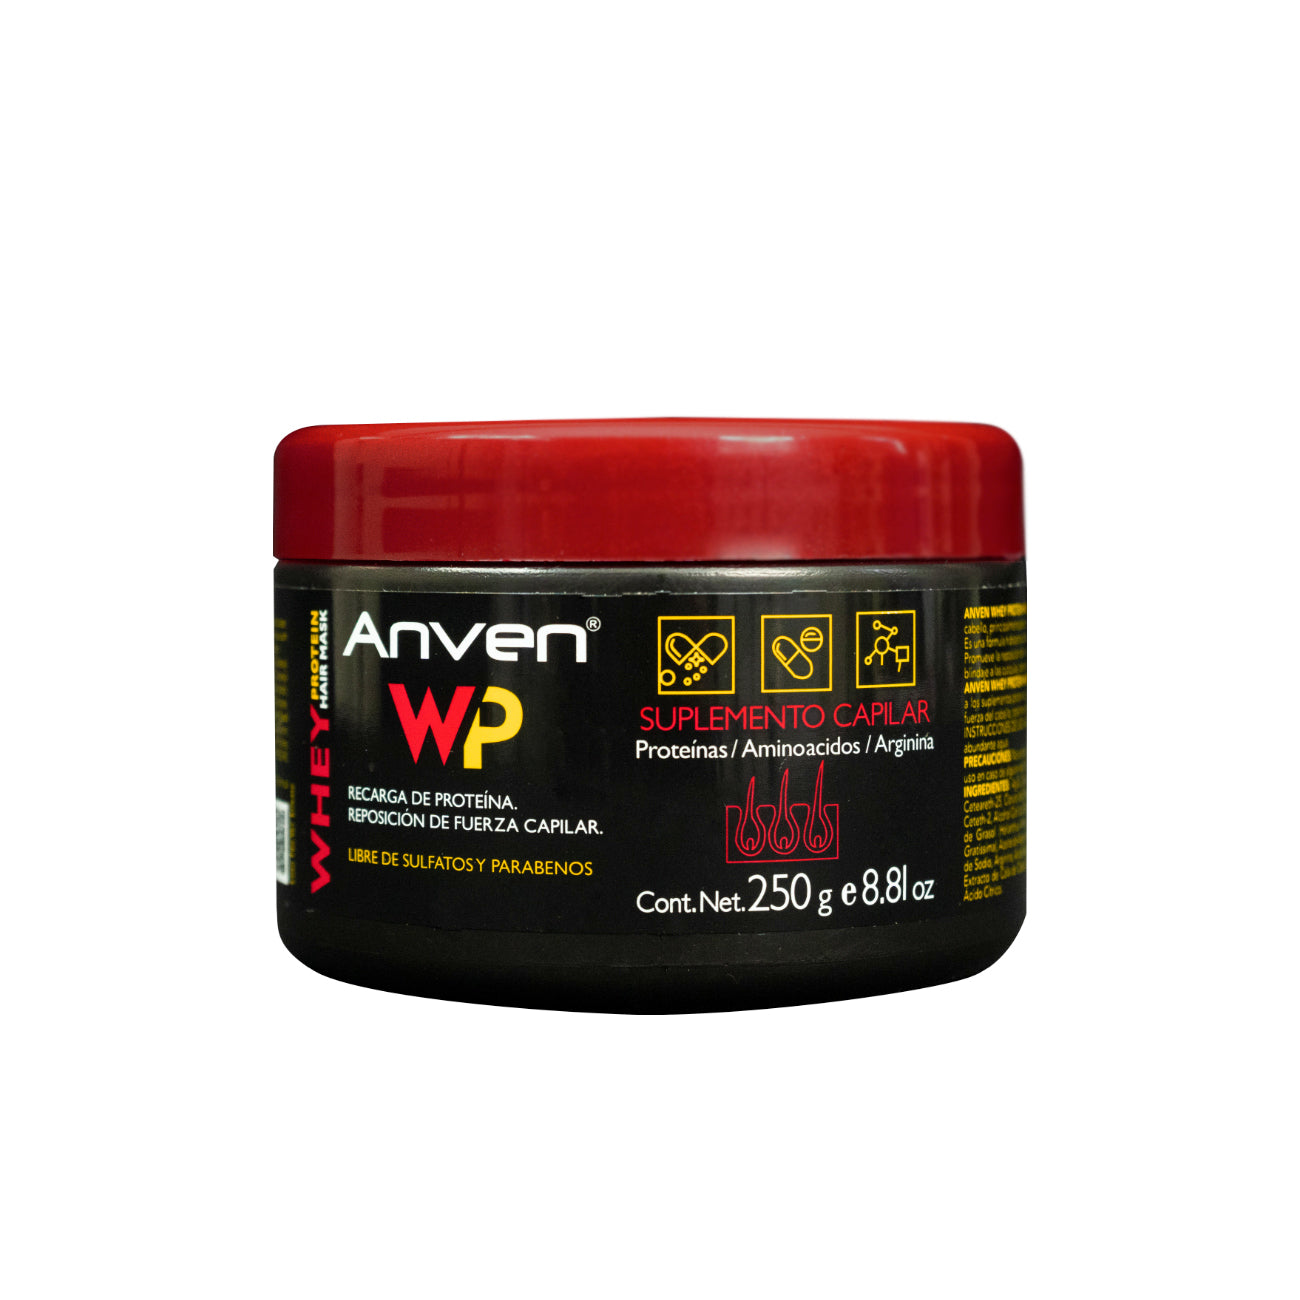 ANVEN WHEY PROTEIN MASK 250 g